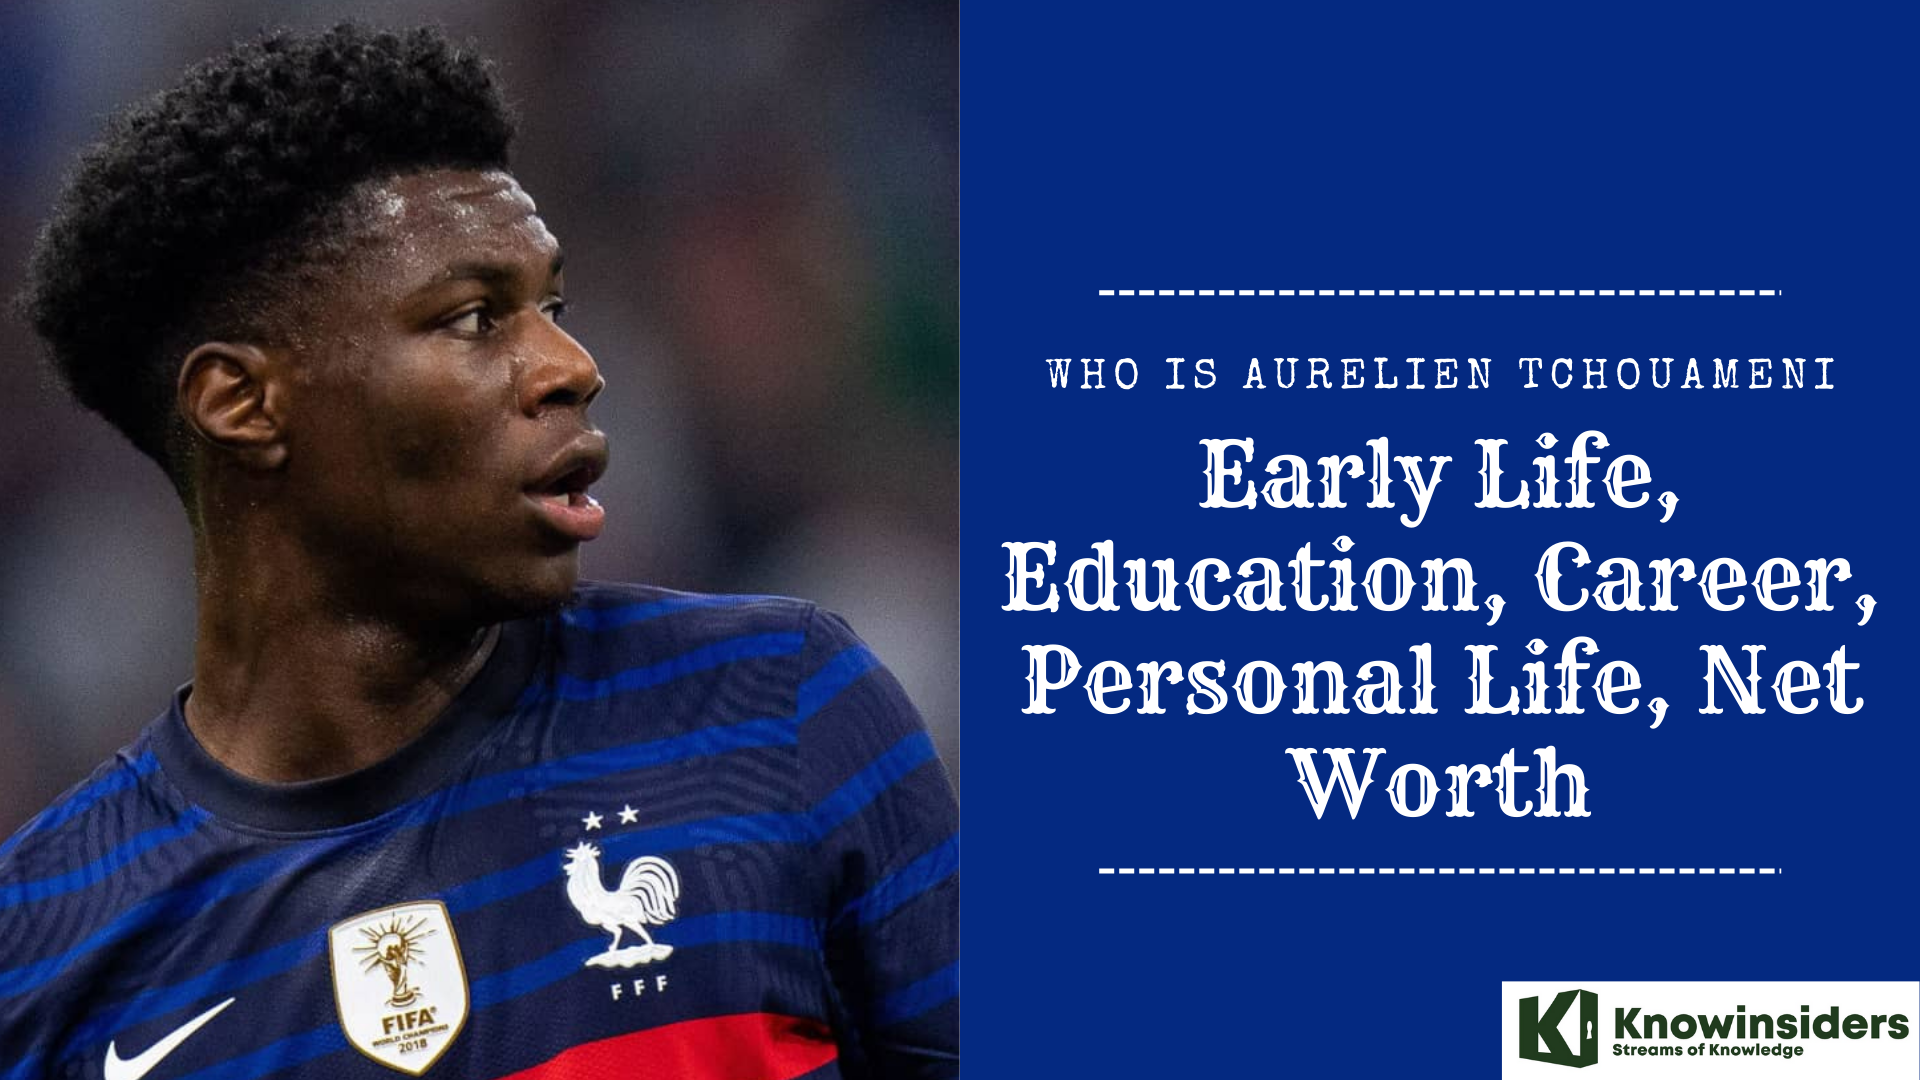 Who Is Aurelien Tchouameni: Early Life, Education, Career, Personal Life, Net Worth